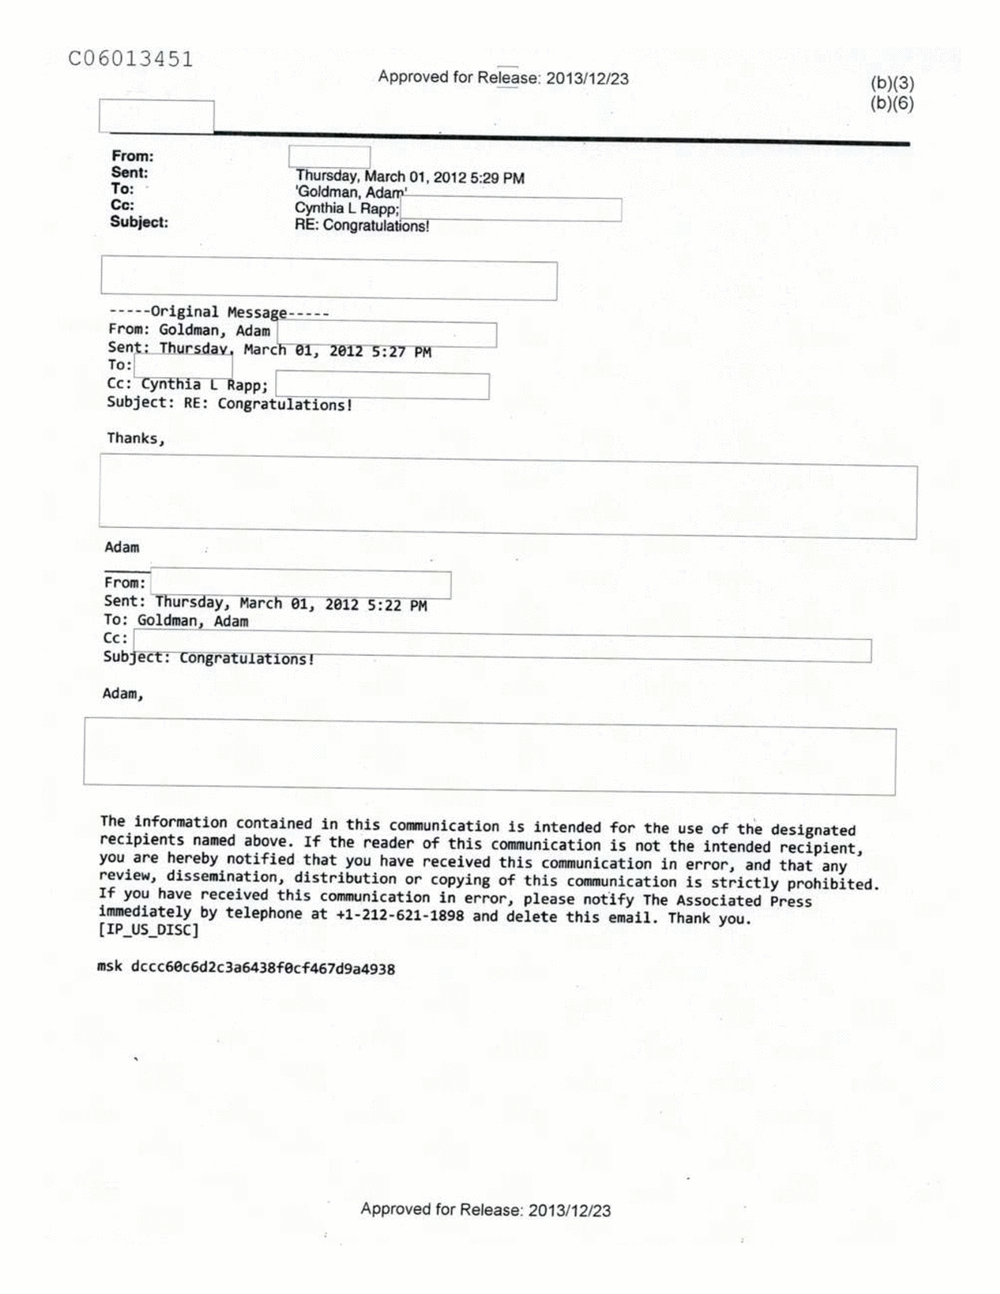 Page 319 from Email Correspondence Between Reporters and CIA Flacks